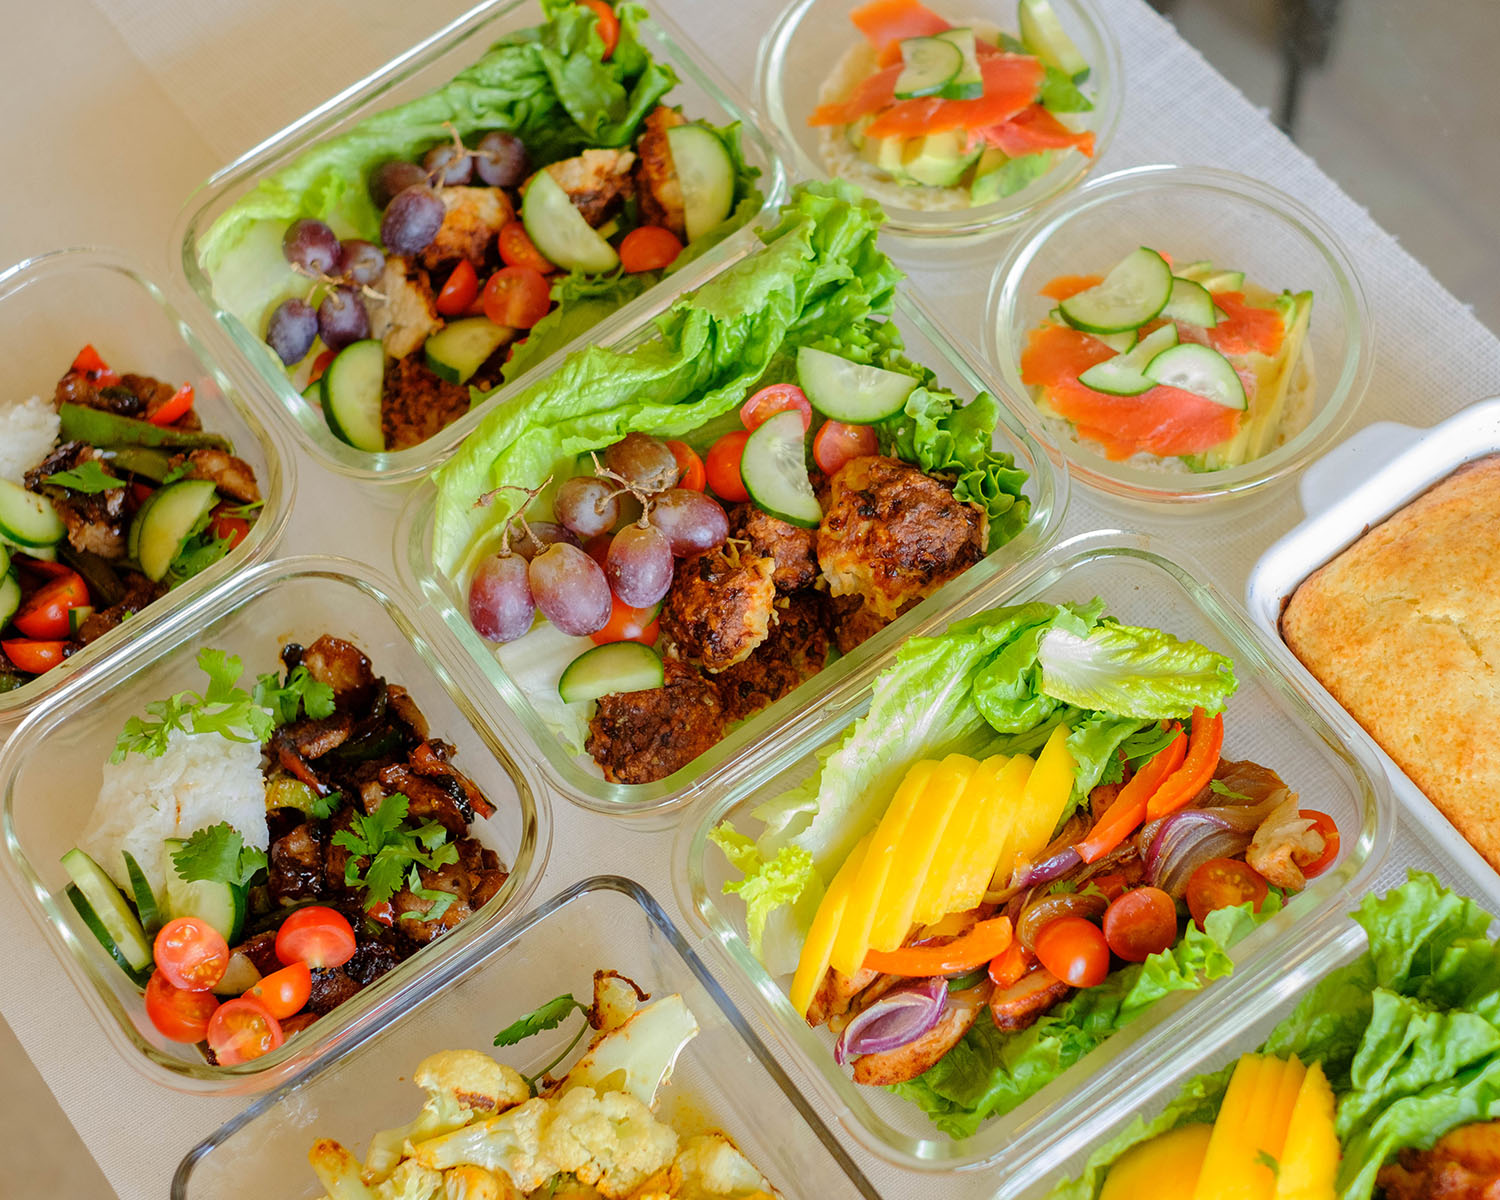 Meal Prep Containers (10) - Meal Prep To Go